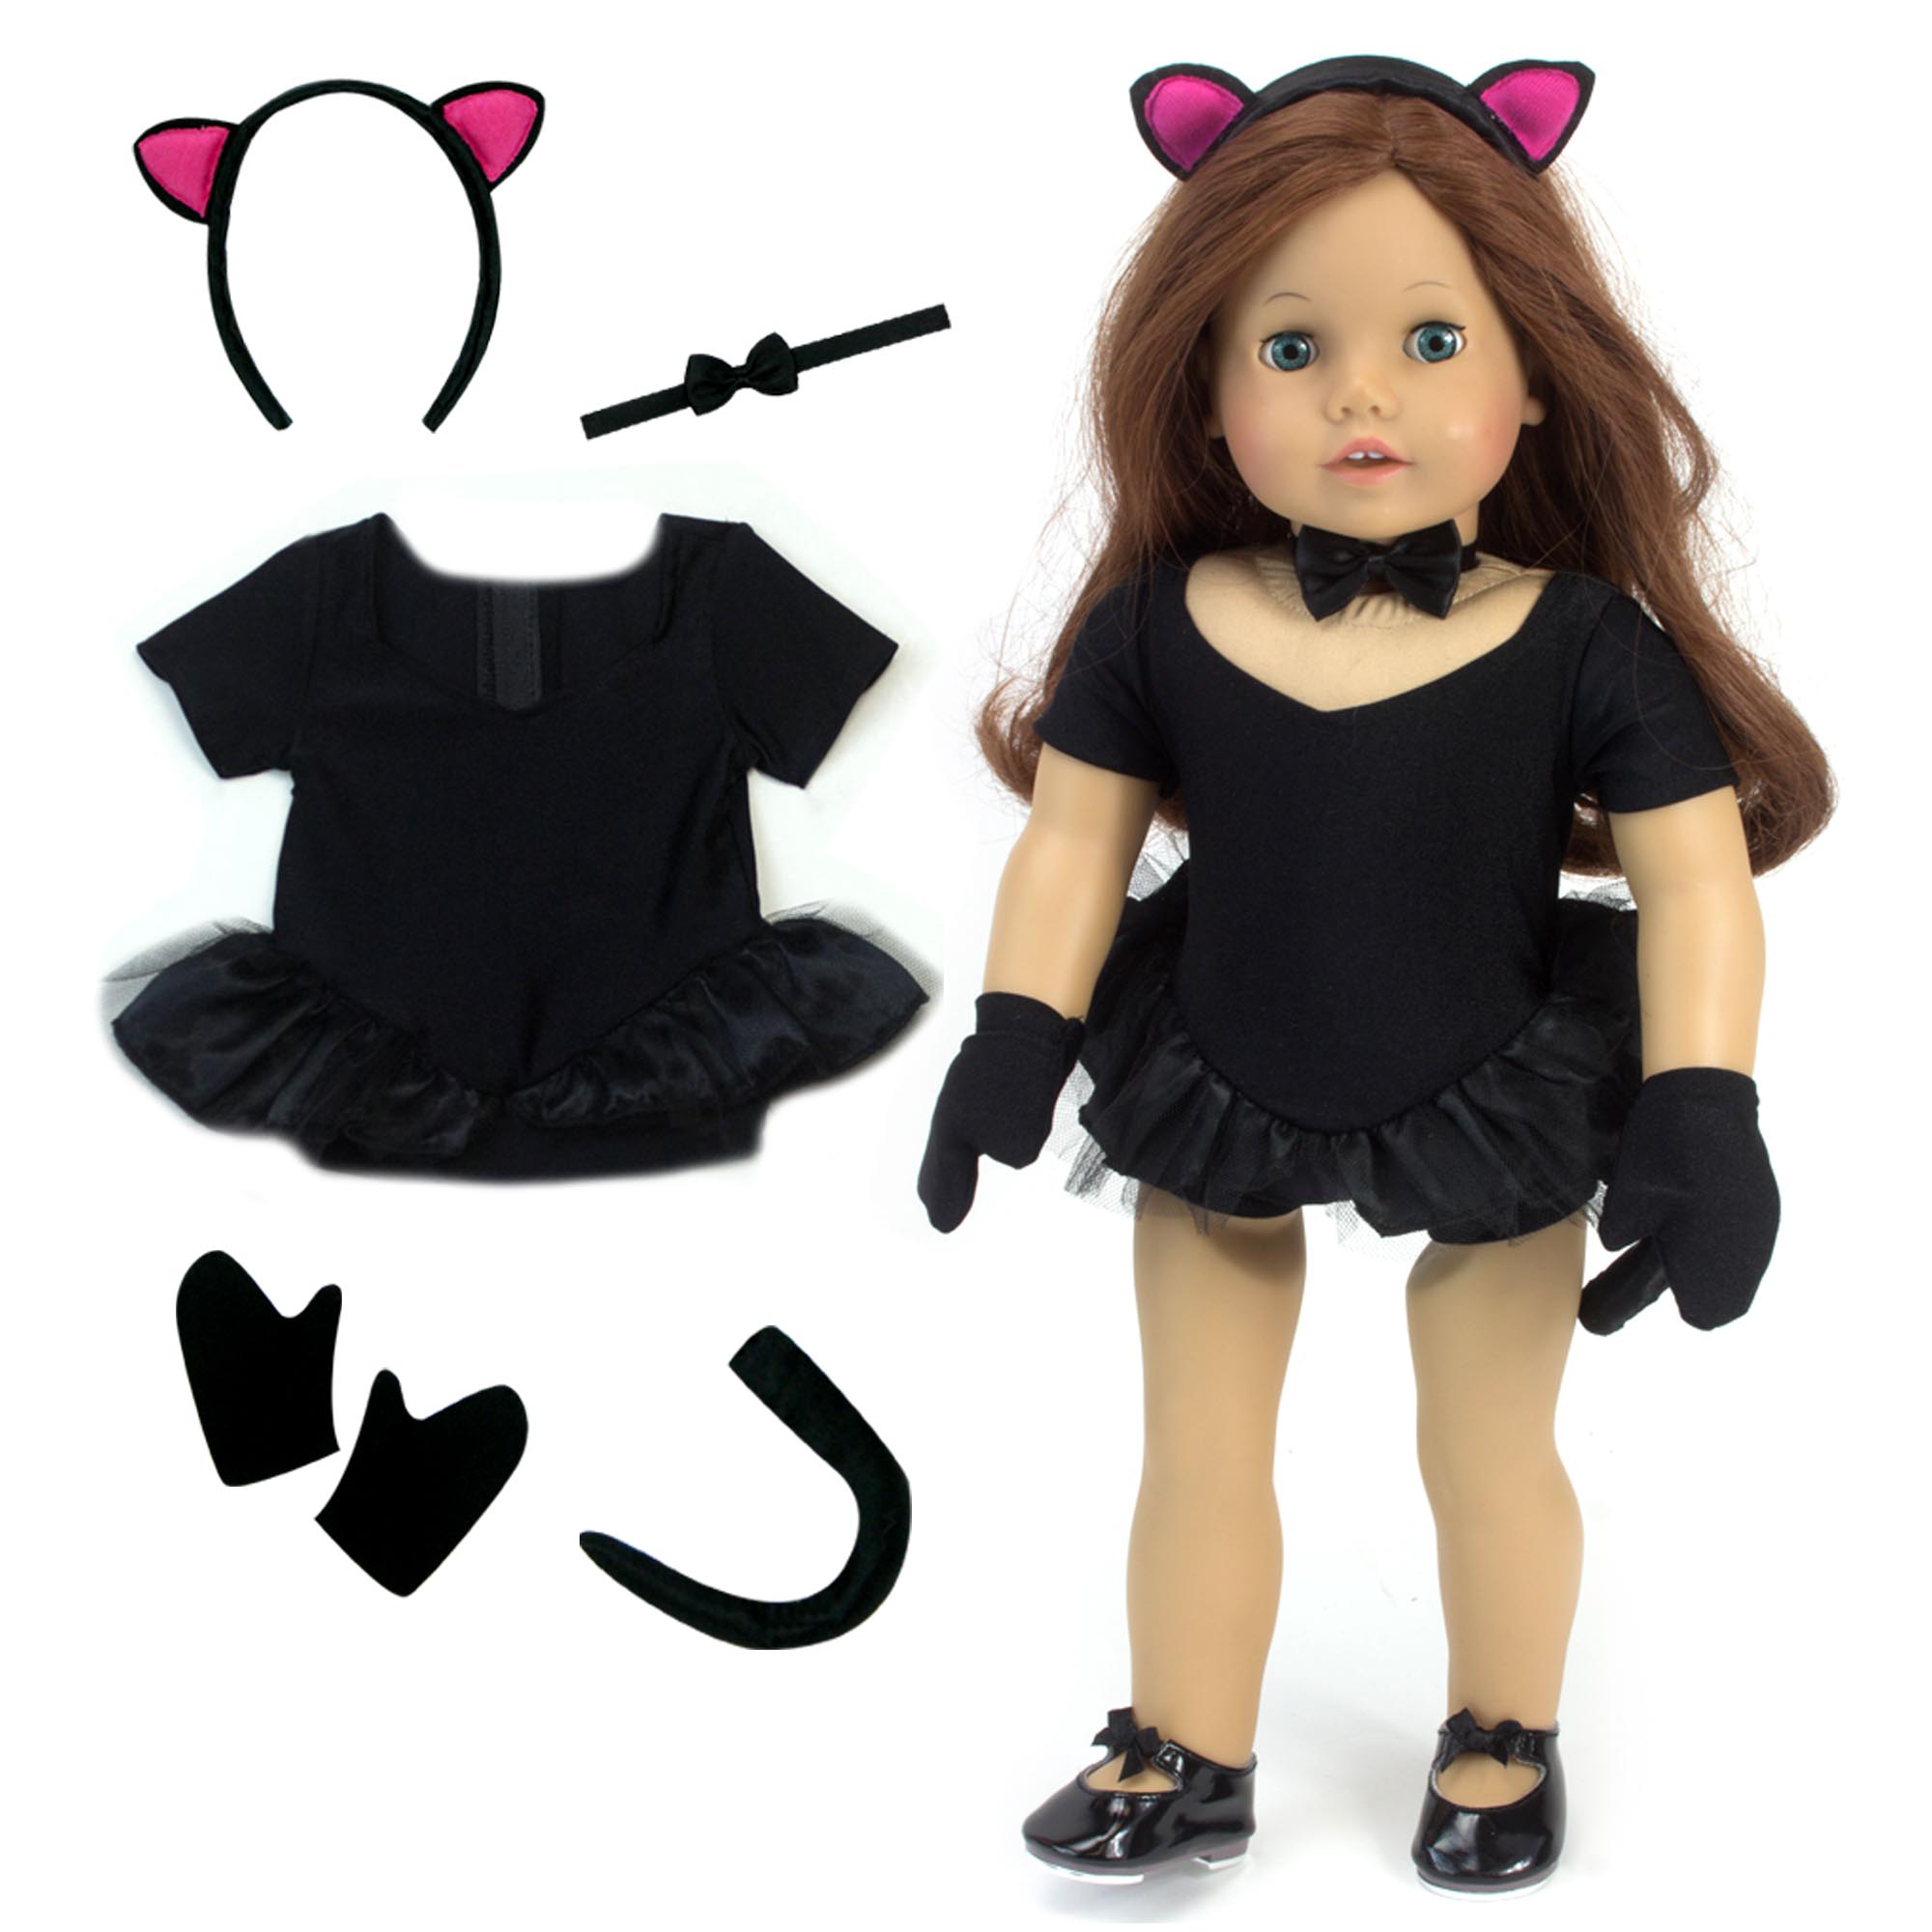 Sophia’s Complete Six-Piece Jazz Dance Leotard & Kitty Cat Costume with Gloves, Tail, Choker, & Ears for 18” Dolls, Black